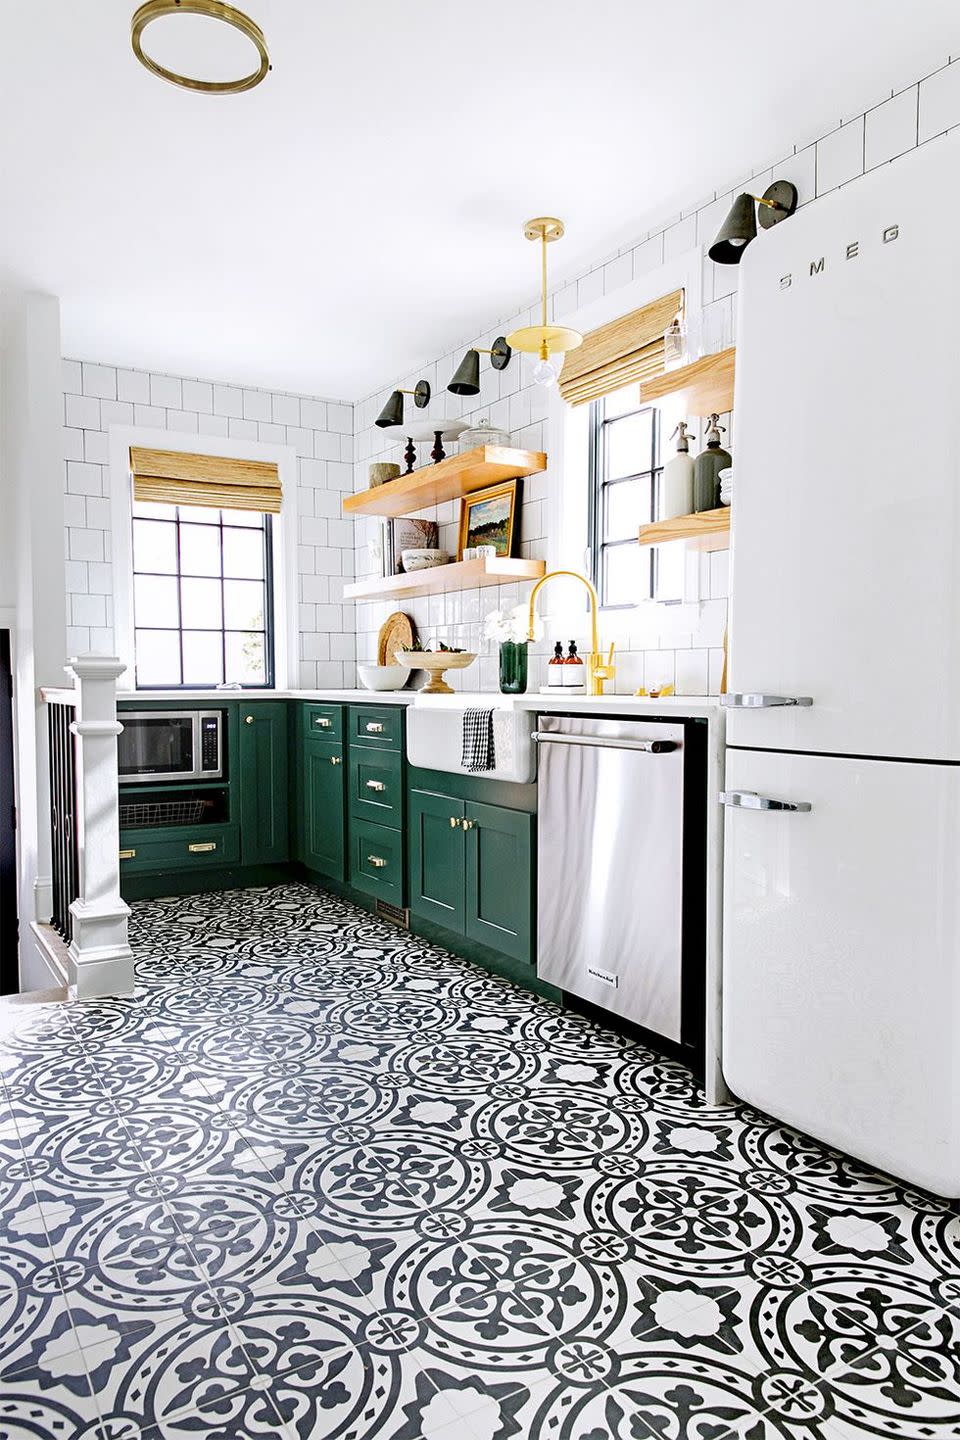 small kitchen ideas pattern and color